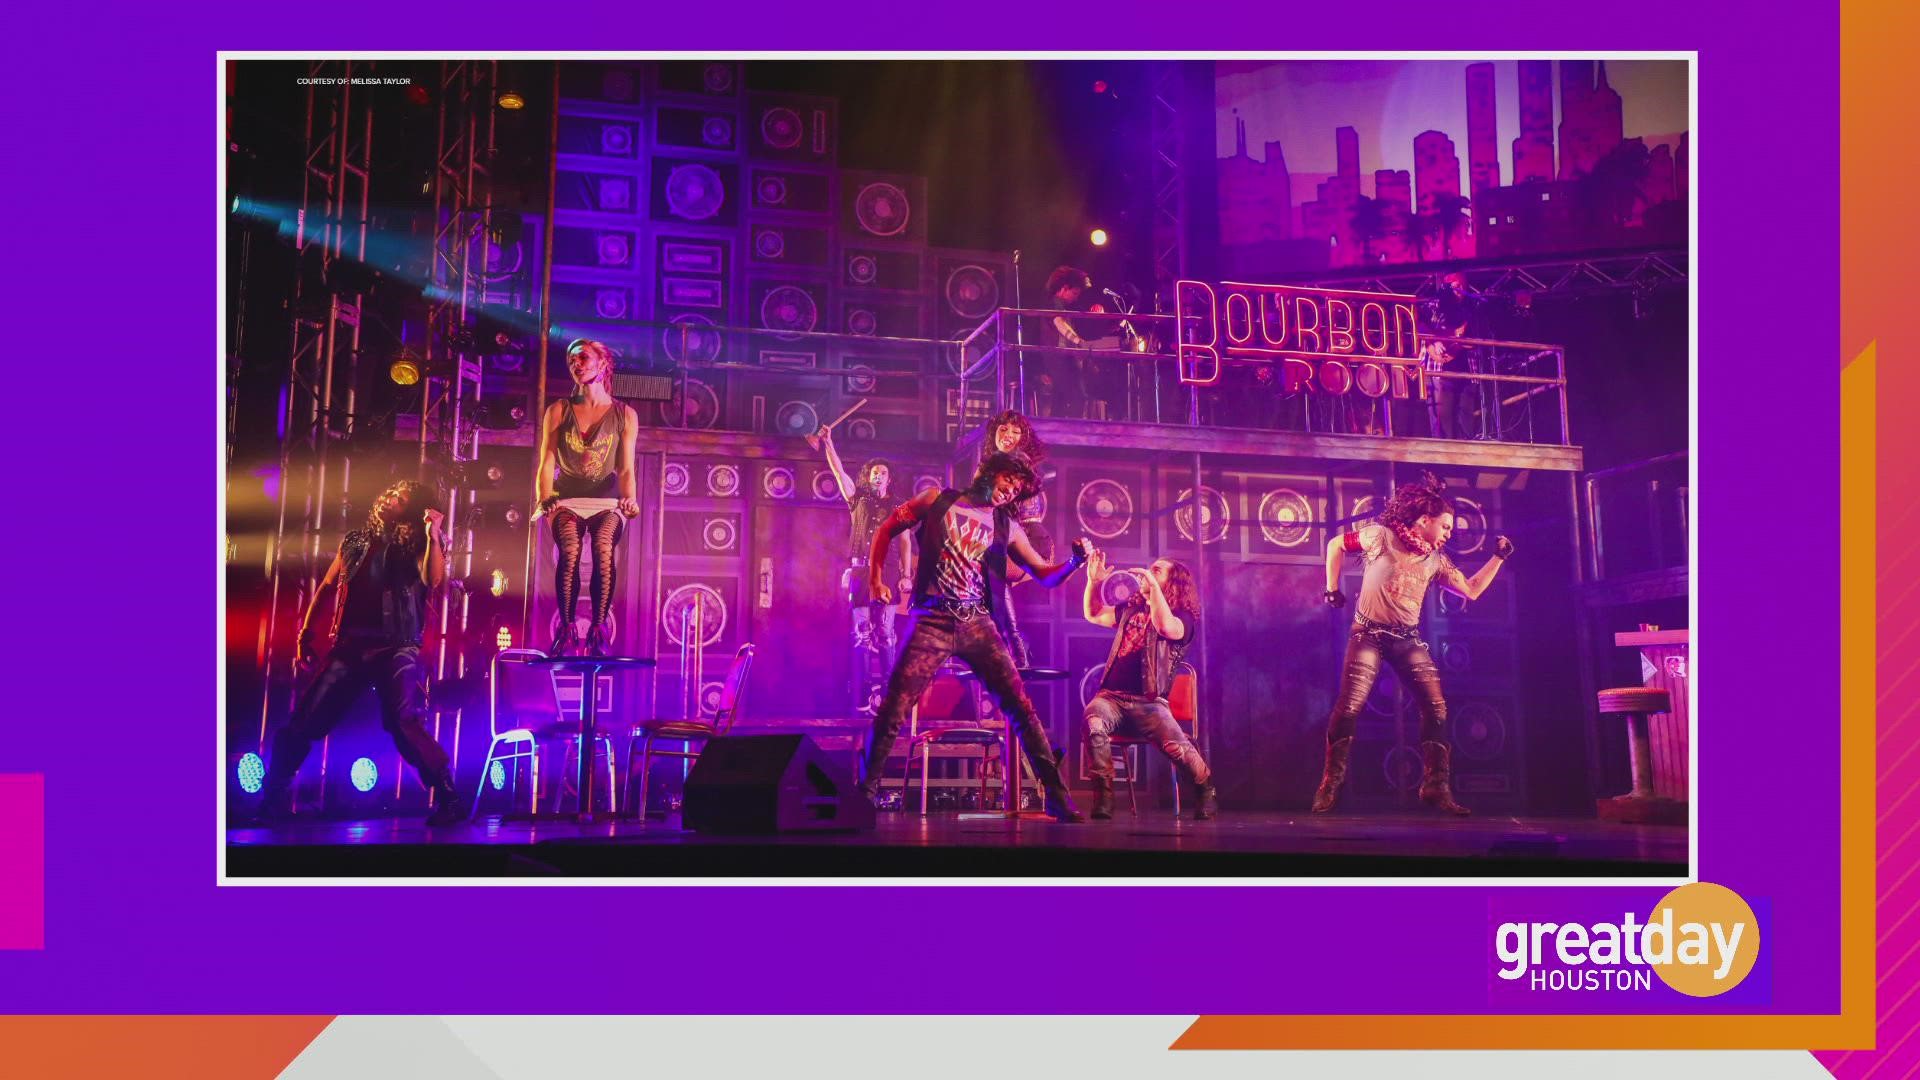 Rock and roll all night with a musical based on the biggest hits of the '80s!